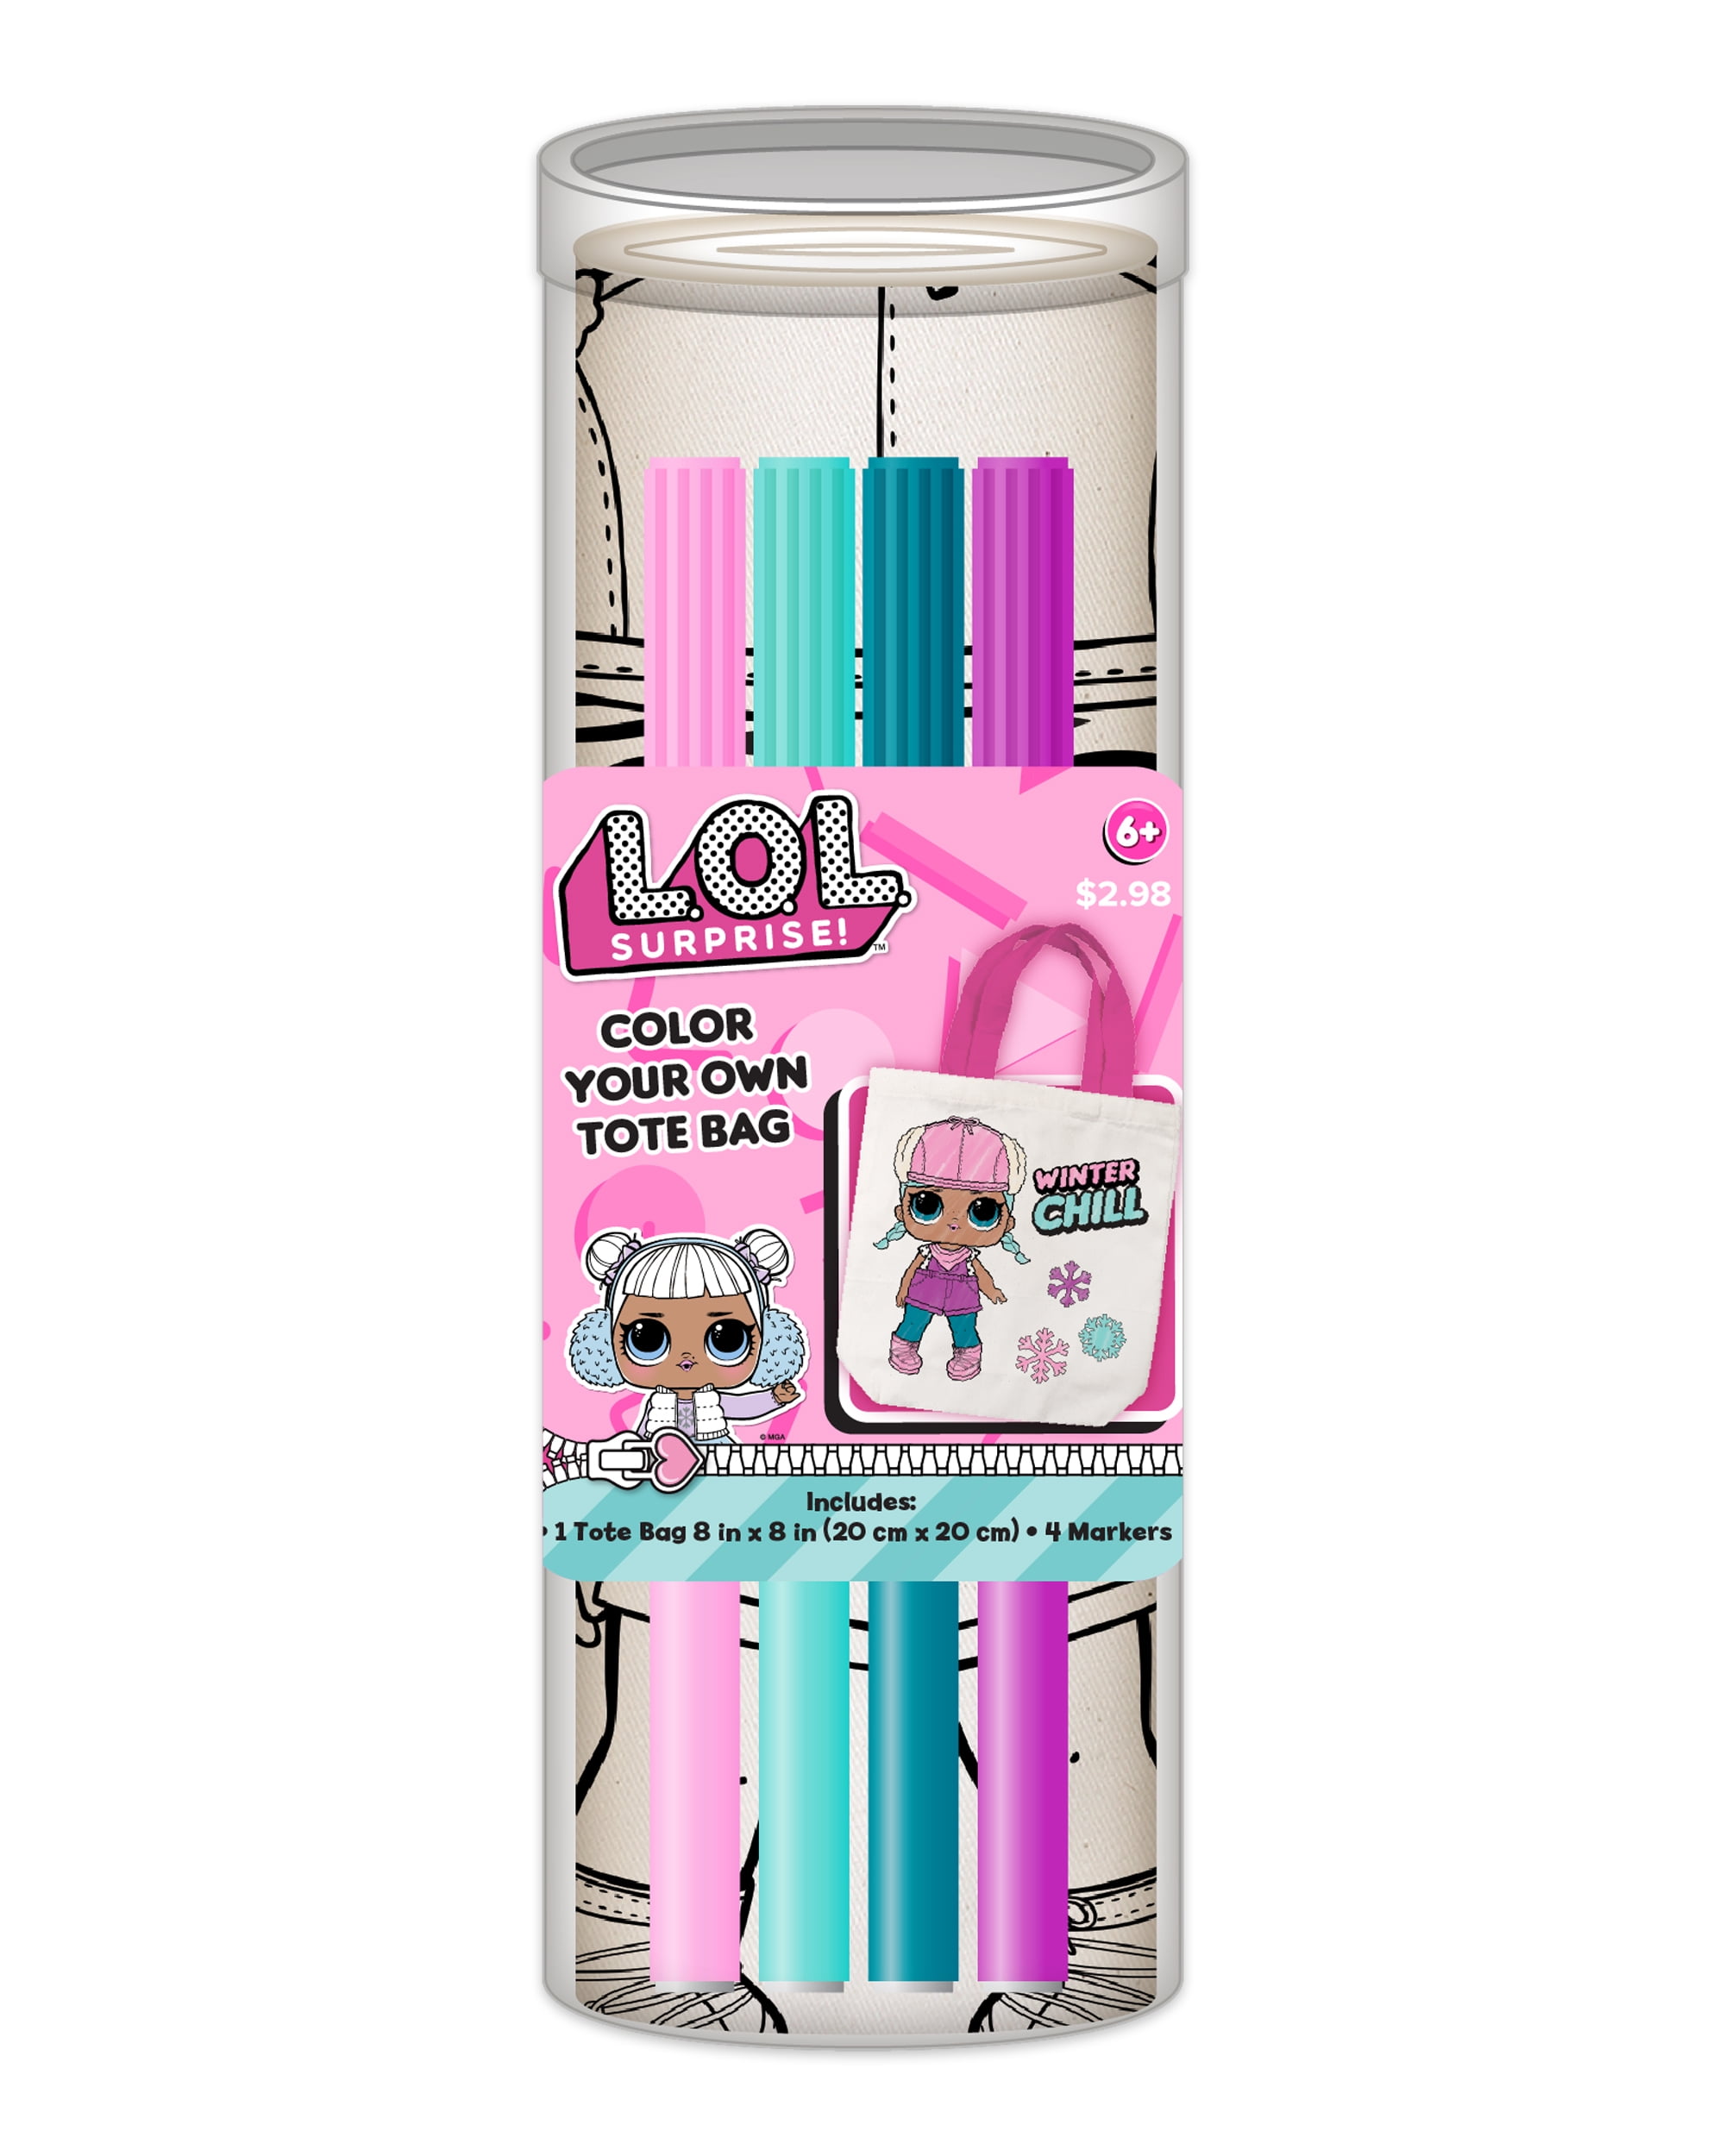 L.O.L Surprise! L.O.L. Surprise! Color Your Own Tote Kit, Includes Tote Bag and Markers for Girls